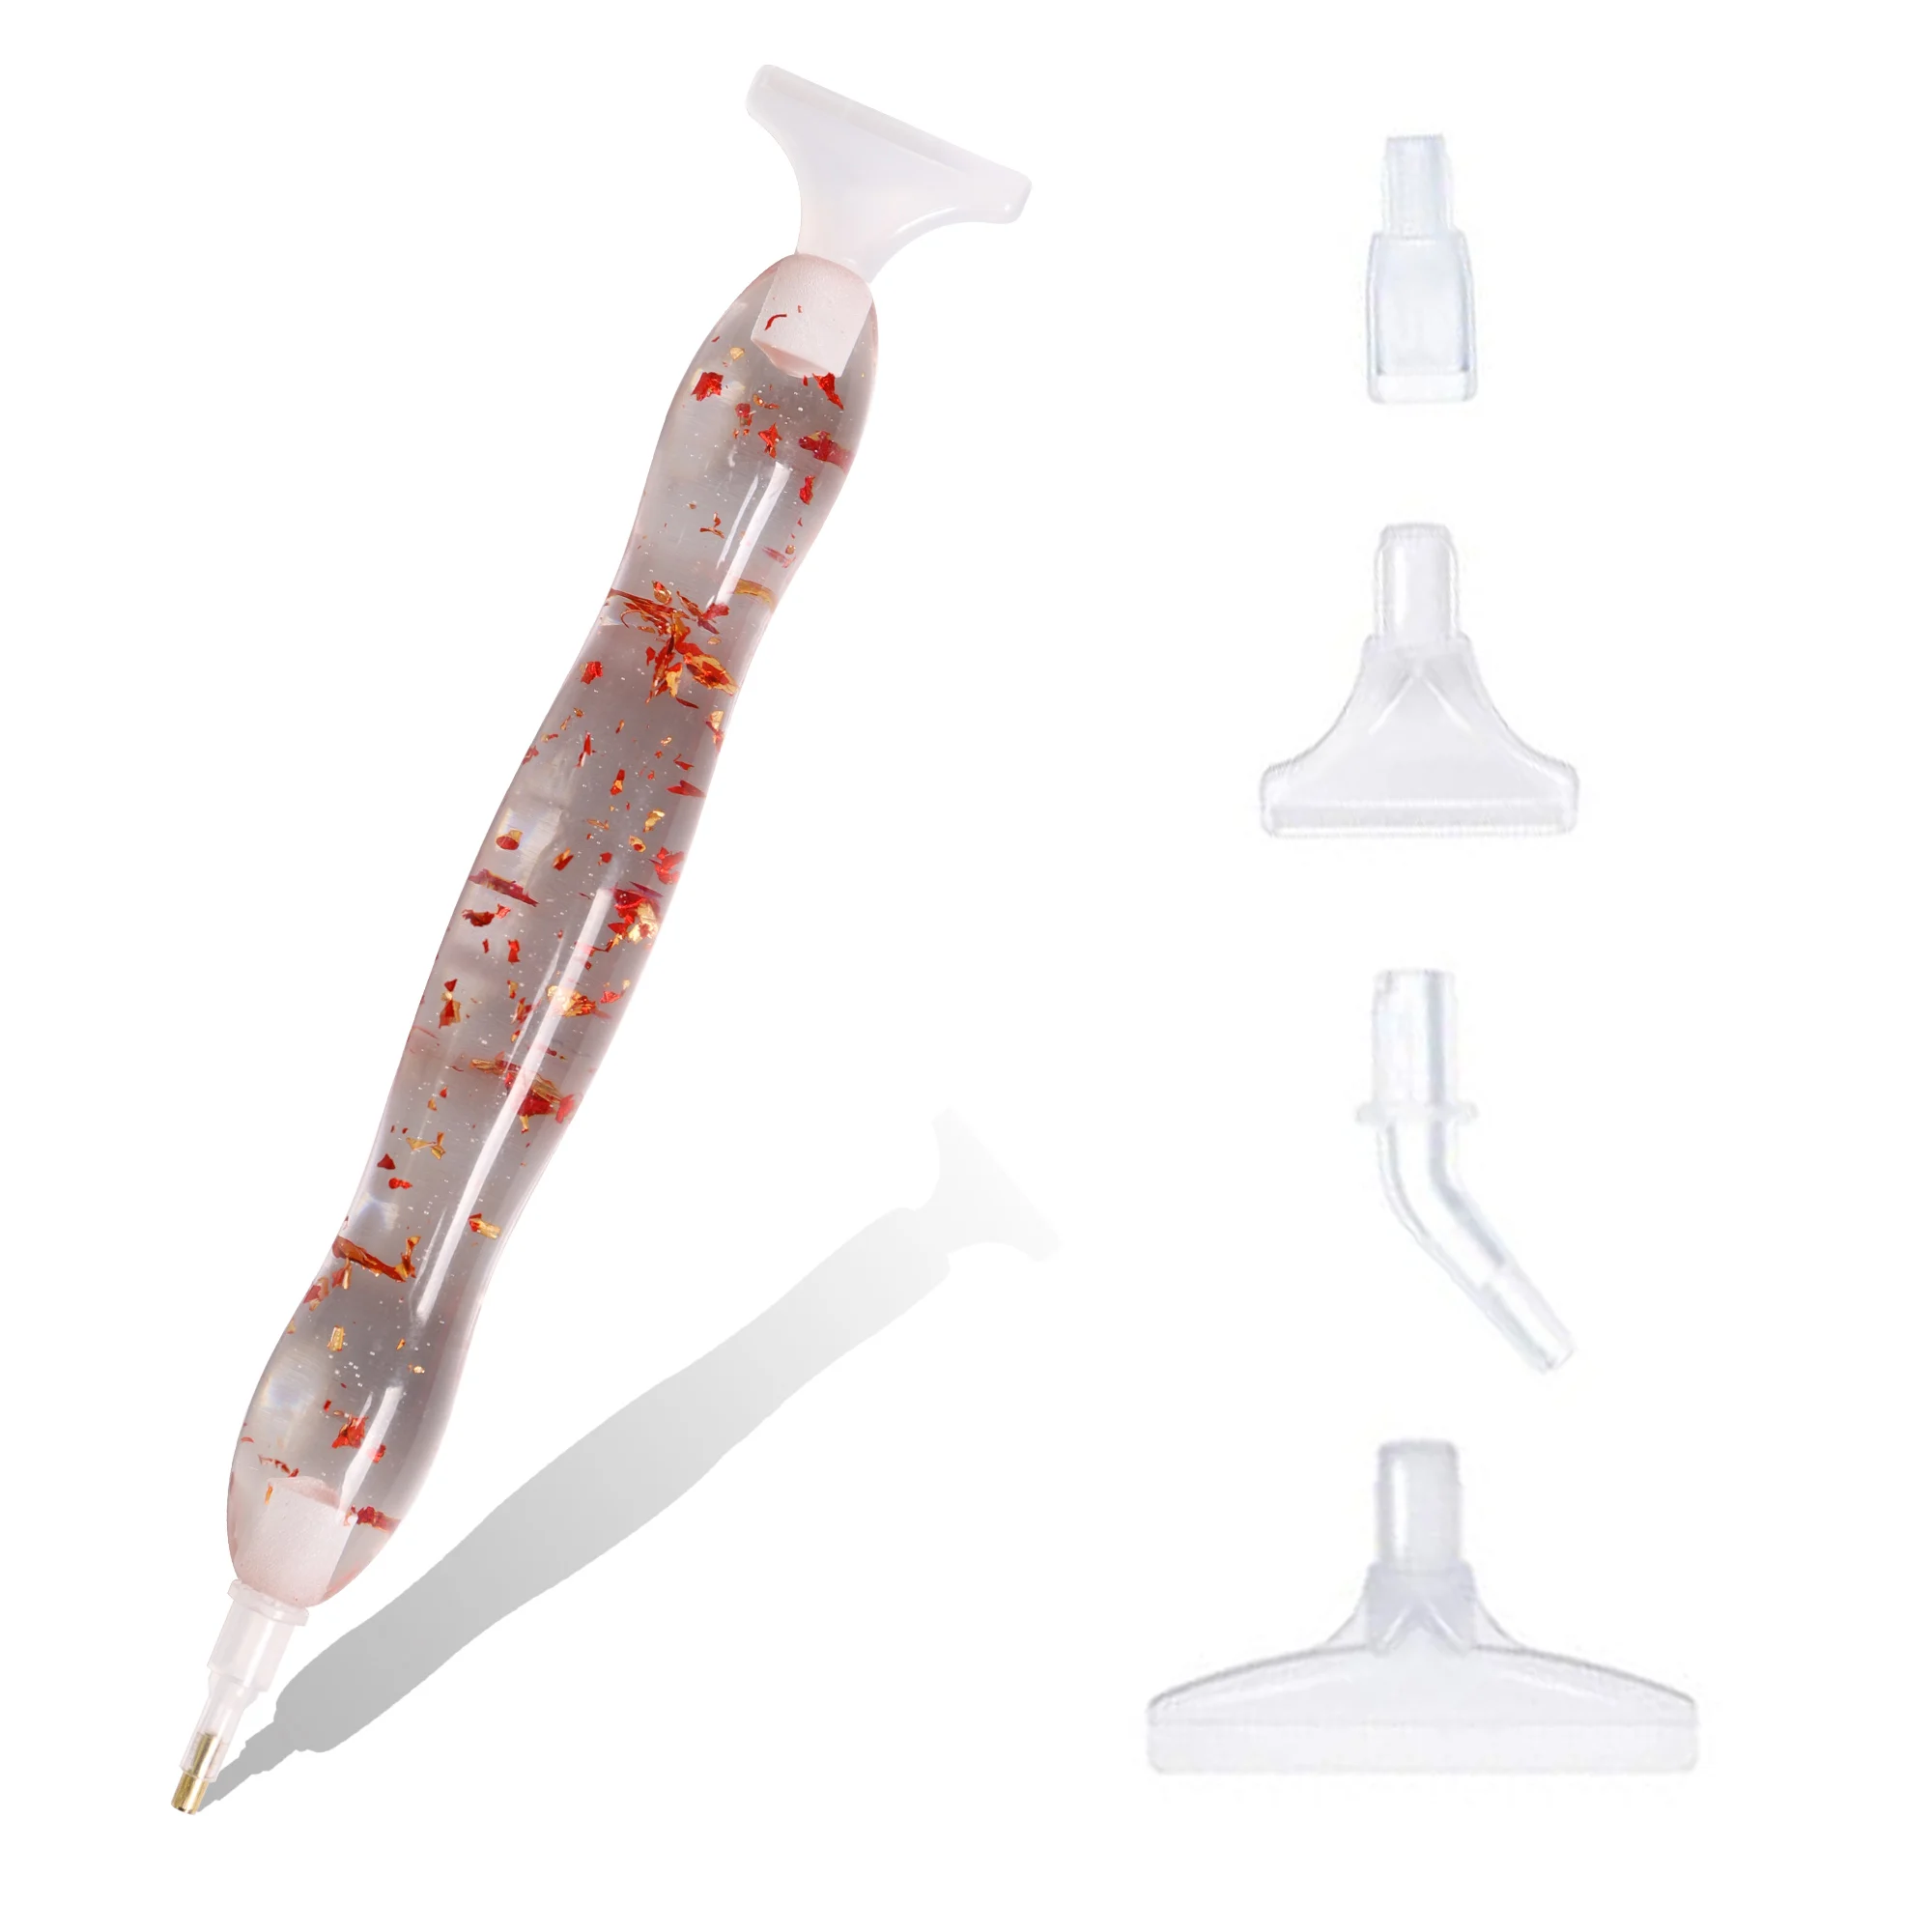 Diamond Embroidery Mosaic Sewing Accessories 5D Diamond Painting Resin Point Drill Pen Cross Stitch Diy Craft Resin Pen 